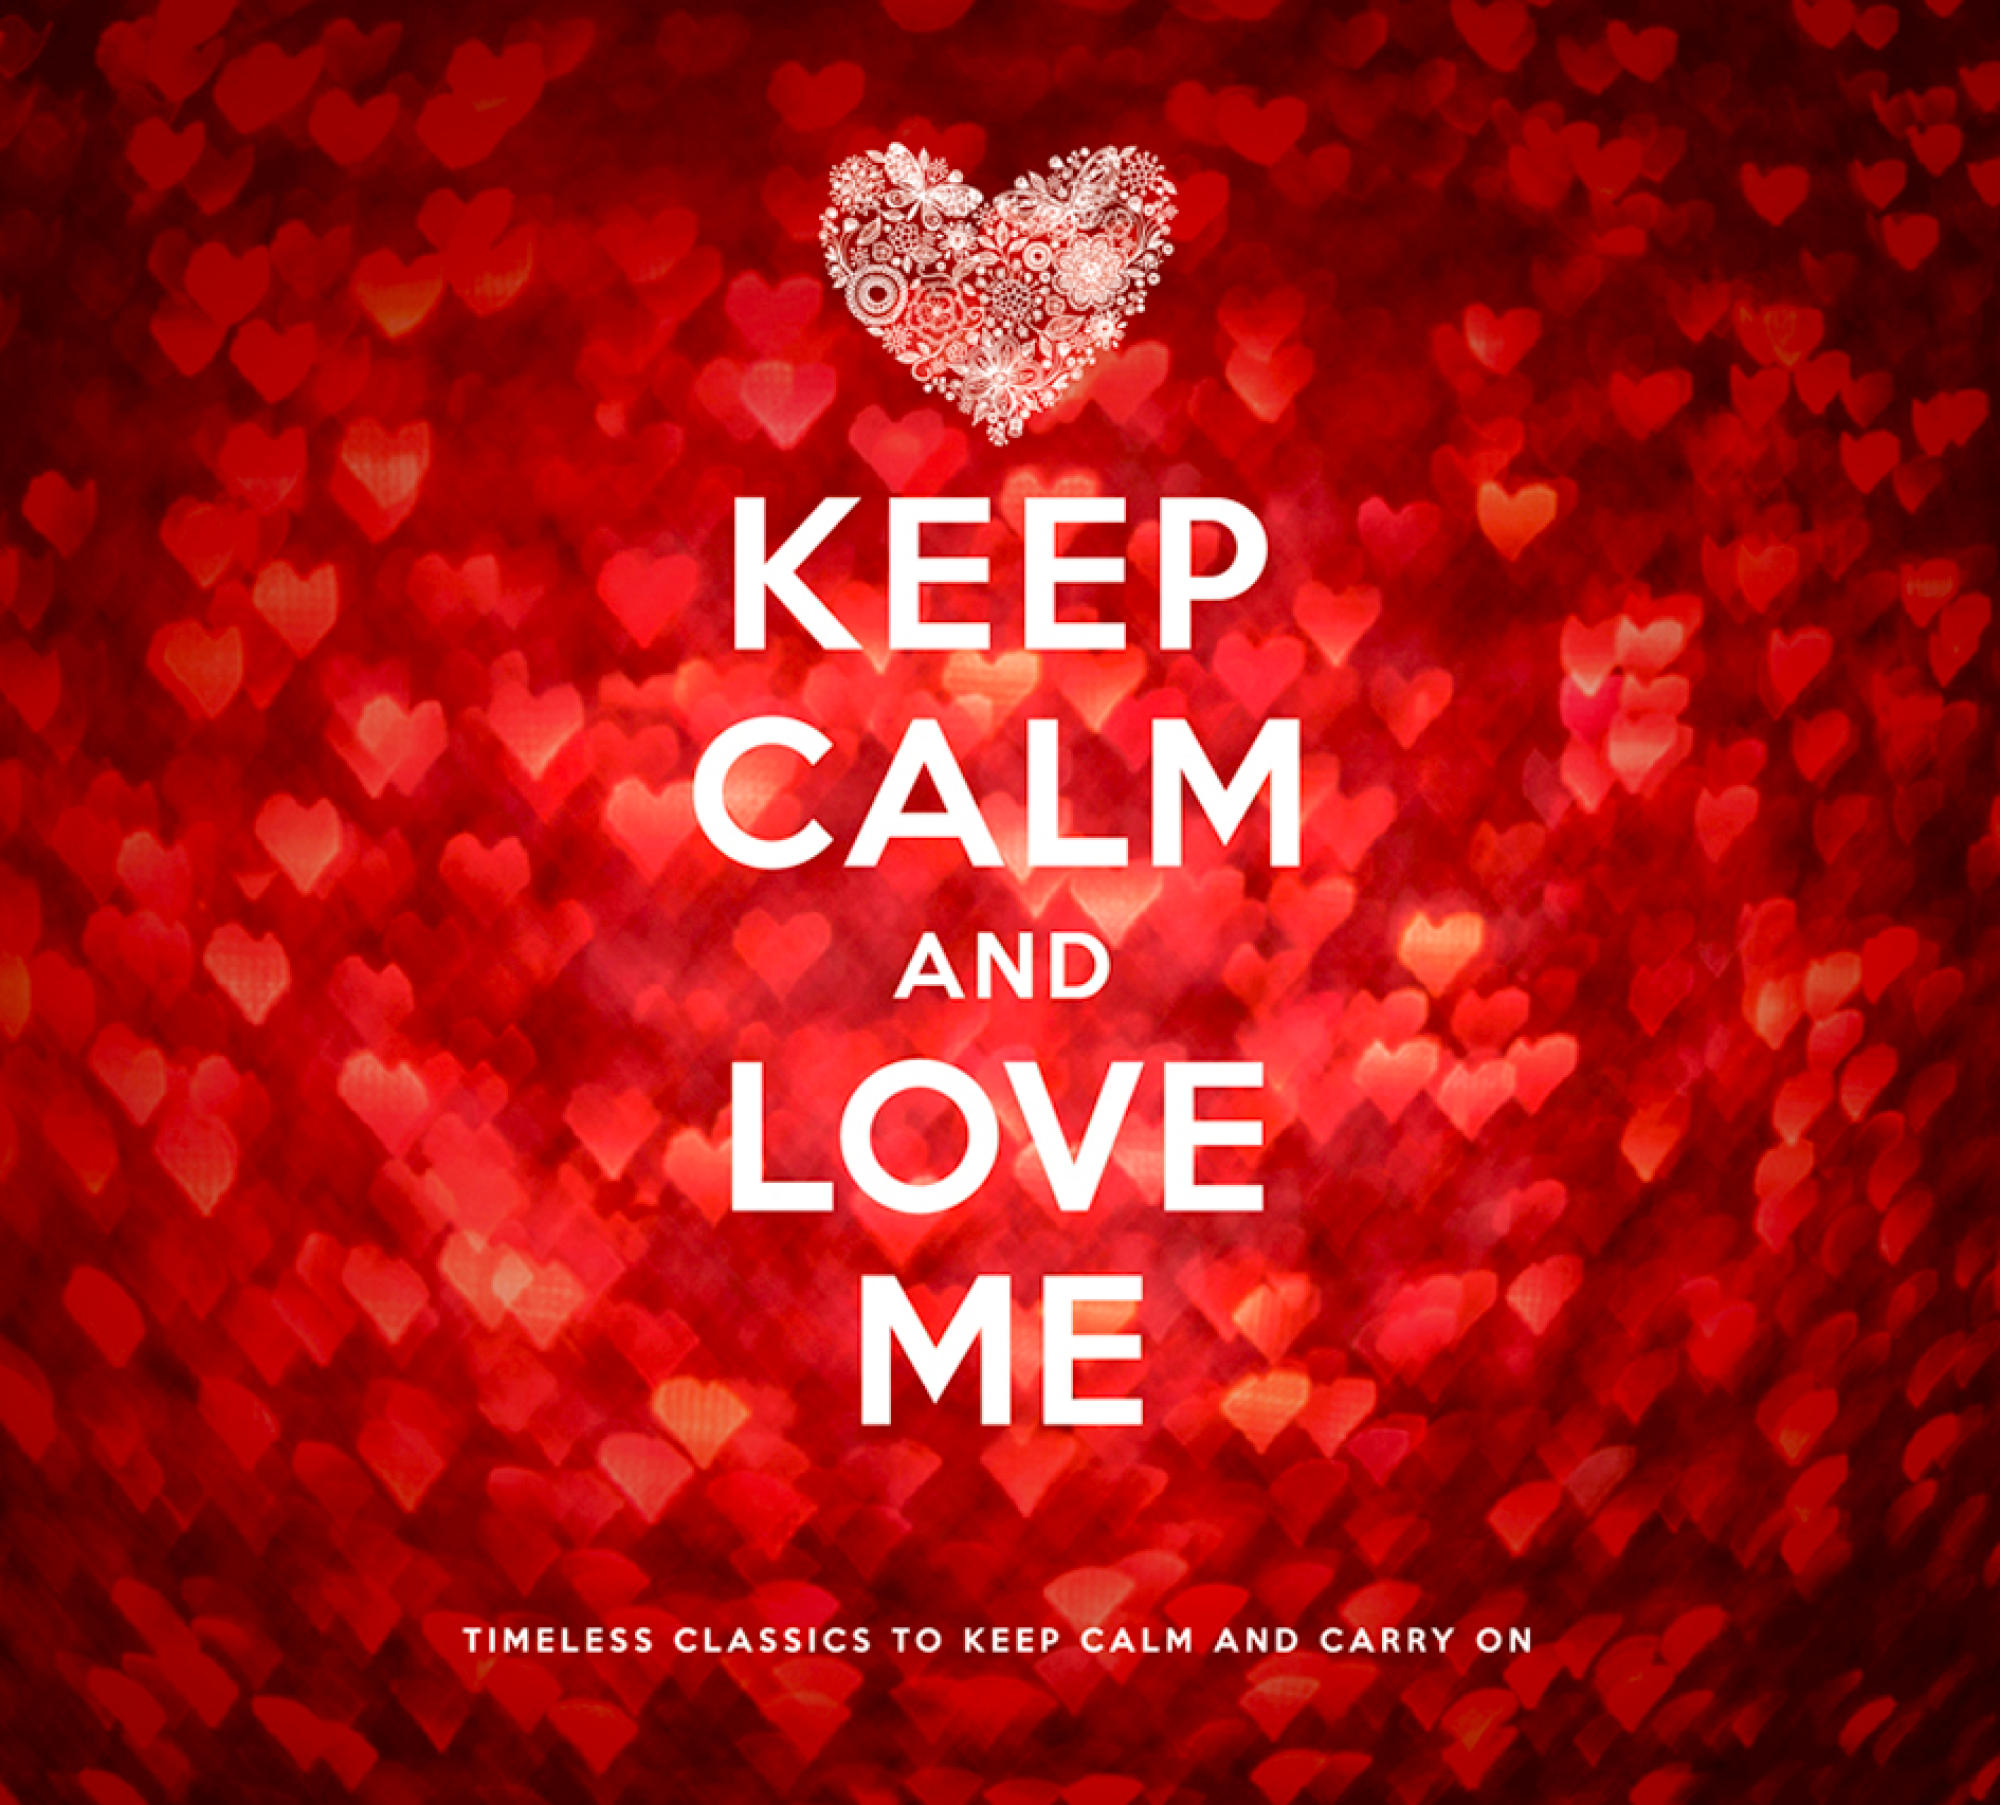 VARIOUS - Calm Keep (CD) - Love Me And